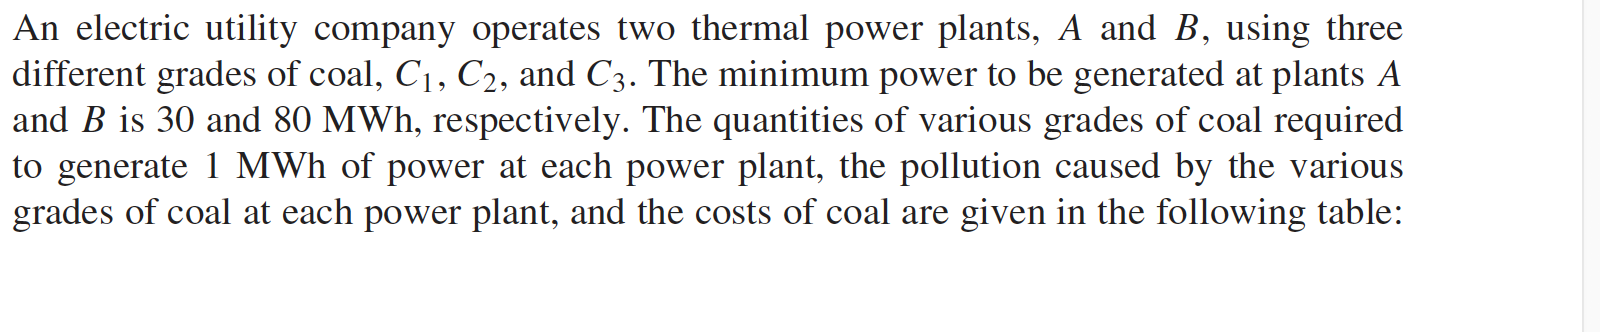 An electric utility company operates two thermal power plants, A and B, using three different grades of coal, C1, C2, and C3.